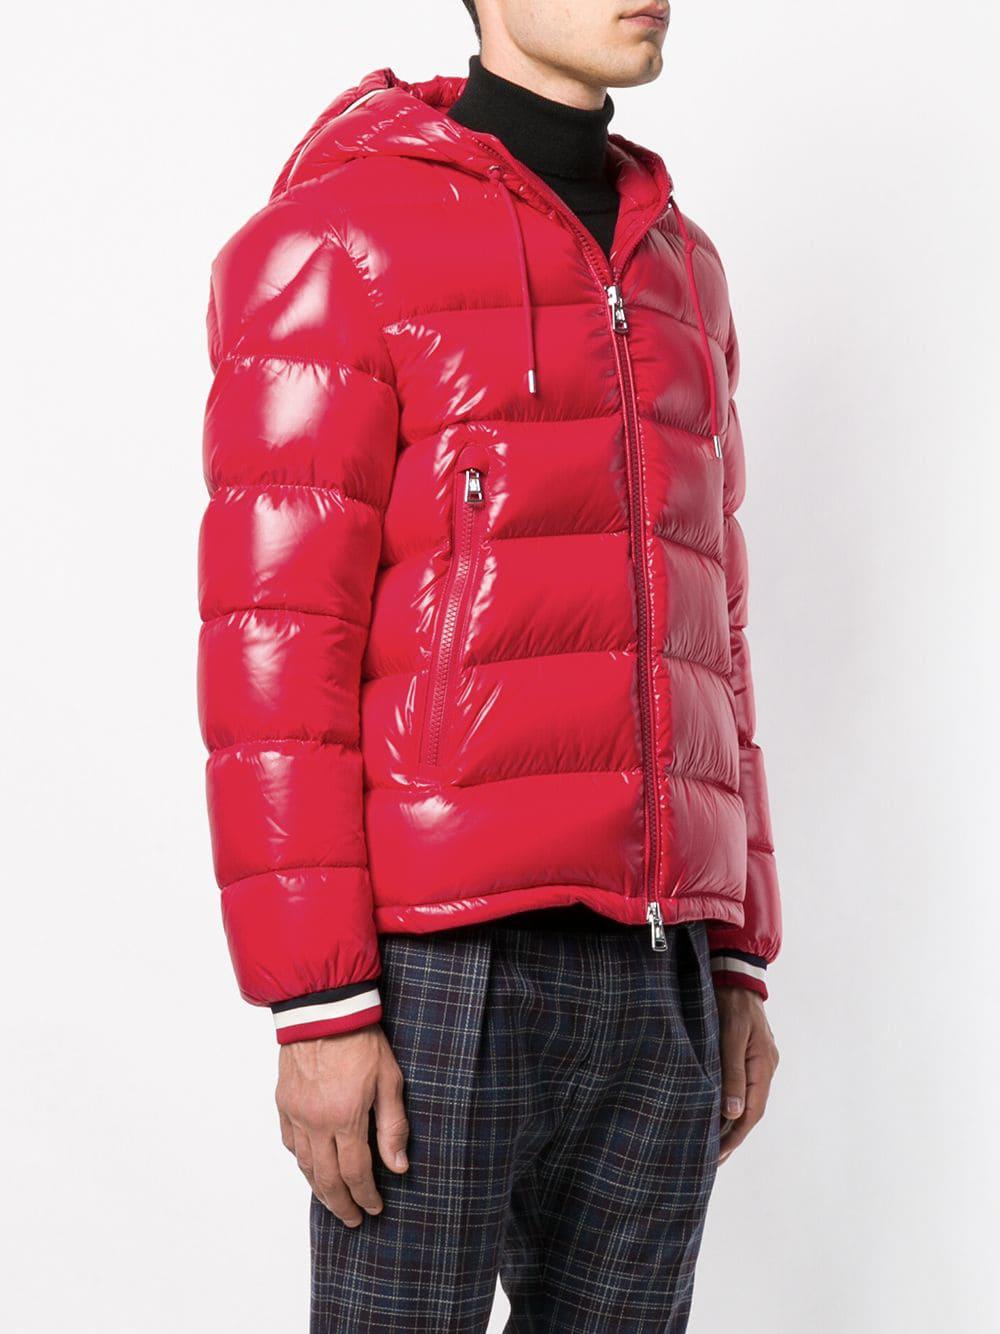 Moncler Synthetic Alberic Padded Jacket in Red for Men - Lyst